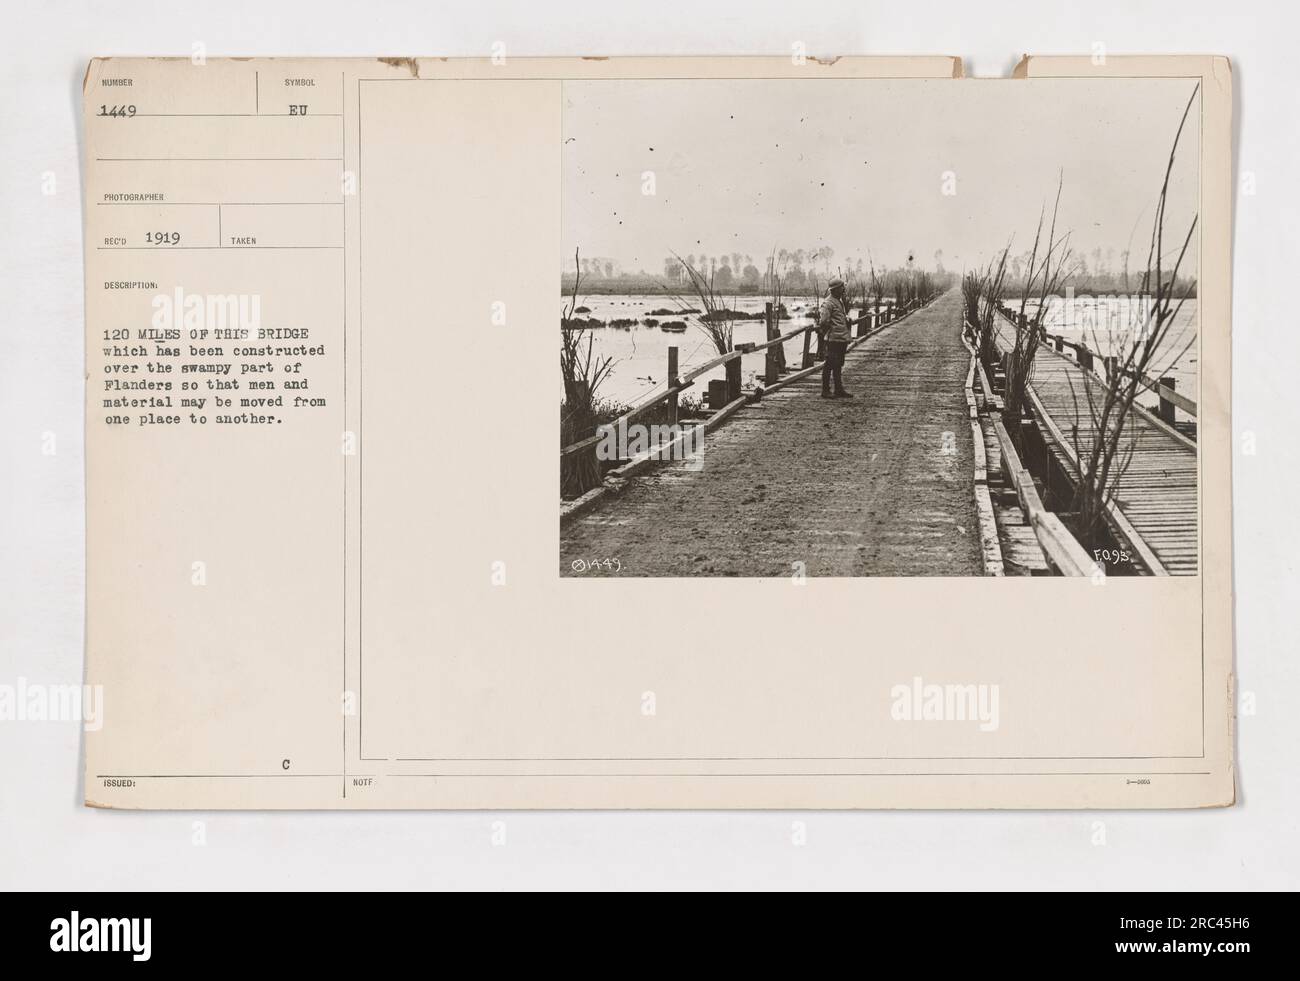 The image shows a 120 mile boardwalk bridge that was constructed over the swampy part of Flanders during World War One. The purpose of the bridge was to facilitate the movement of men and material from one location to another. The photograph was taken in 1919. Stock Photo